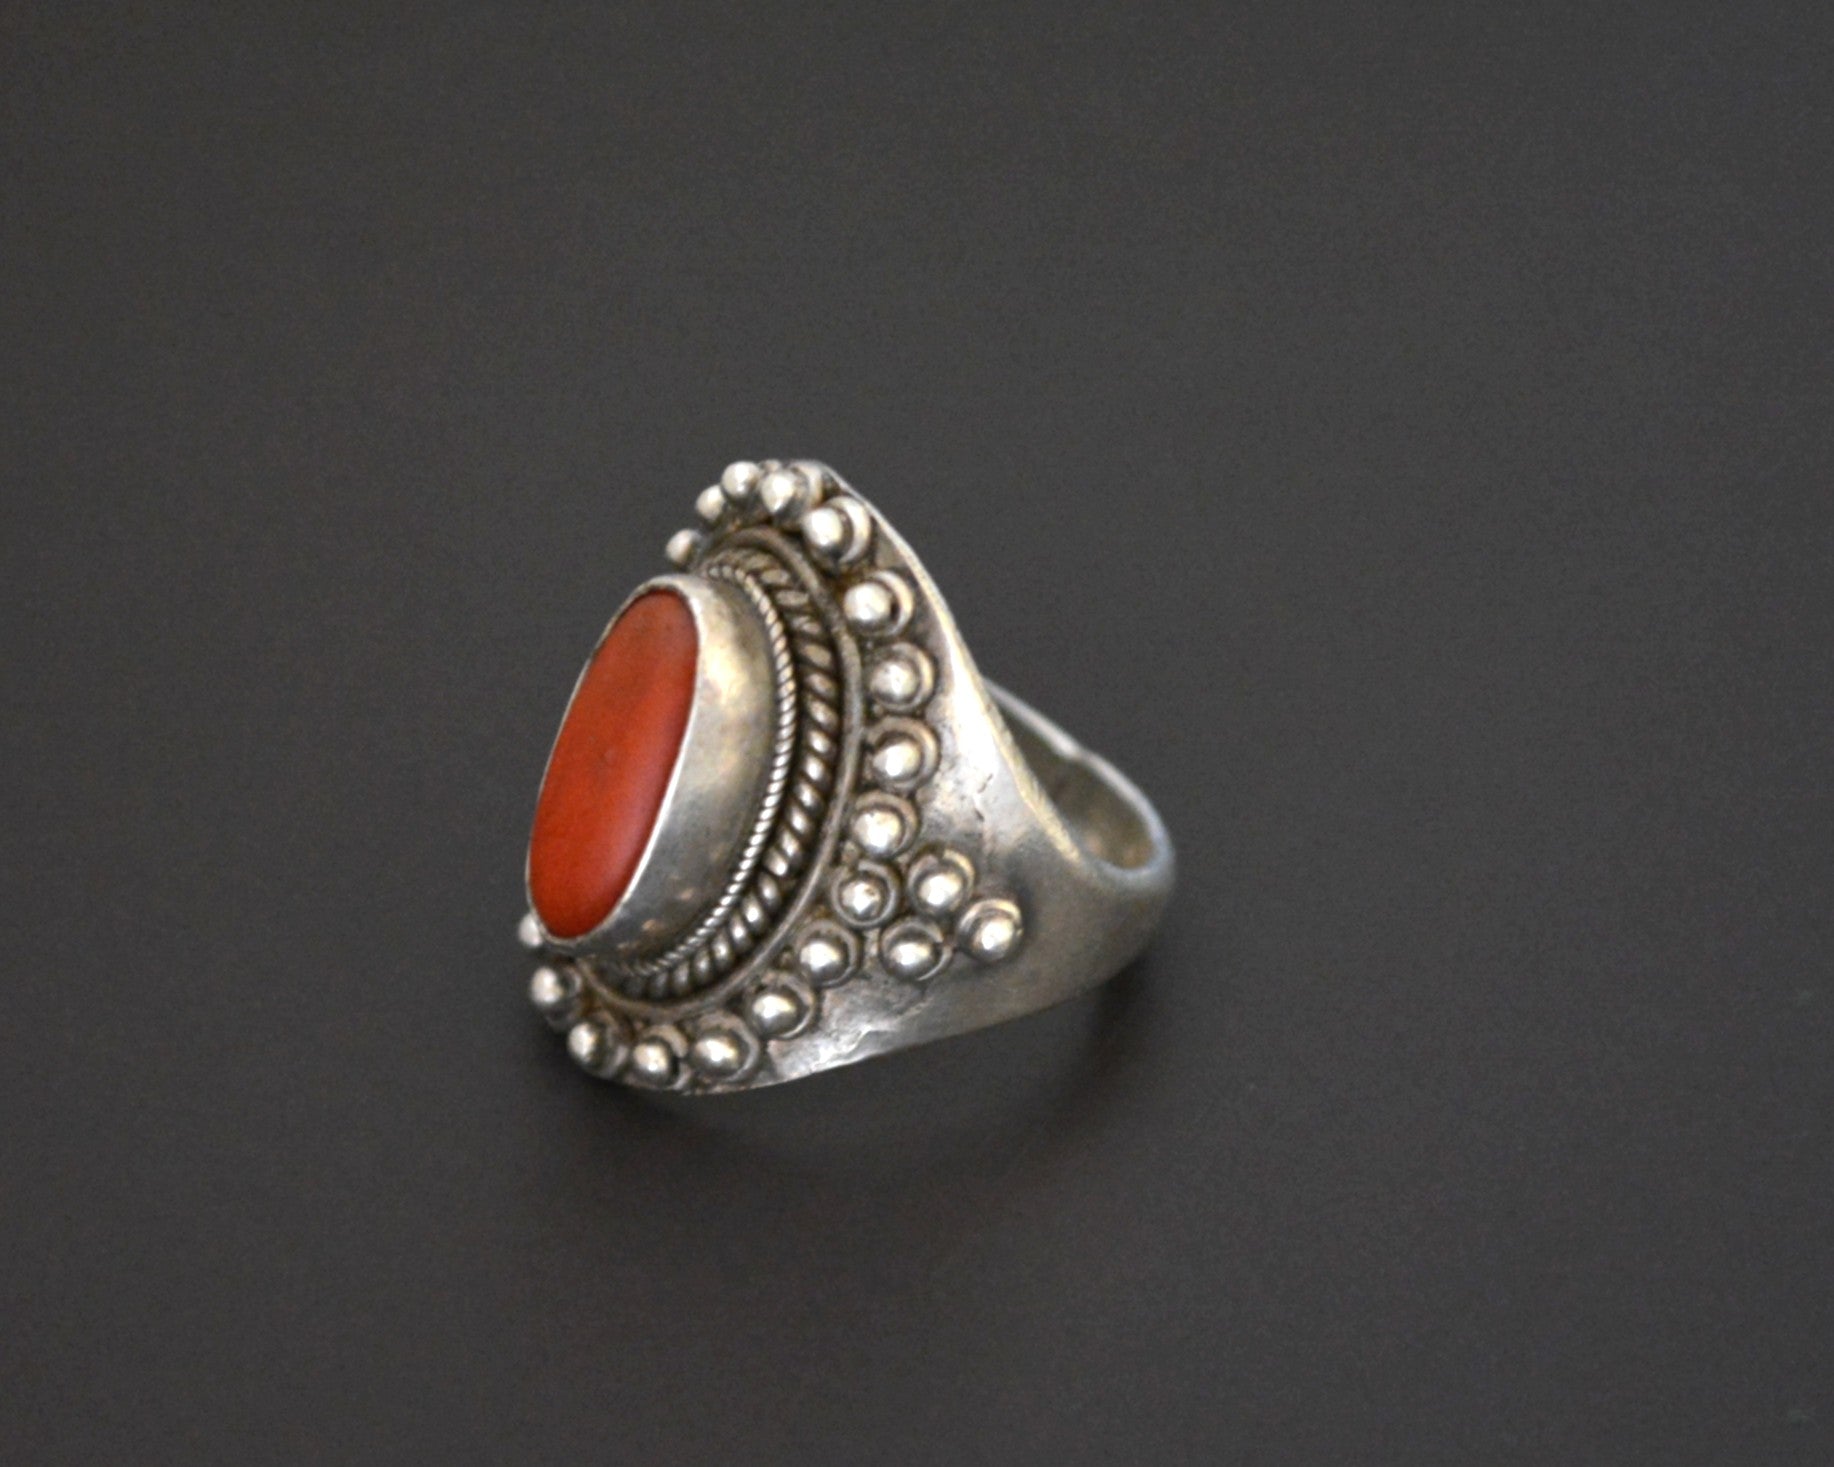 Vintage Nepali Coral Sterling Silver Ring - Size 7